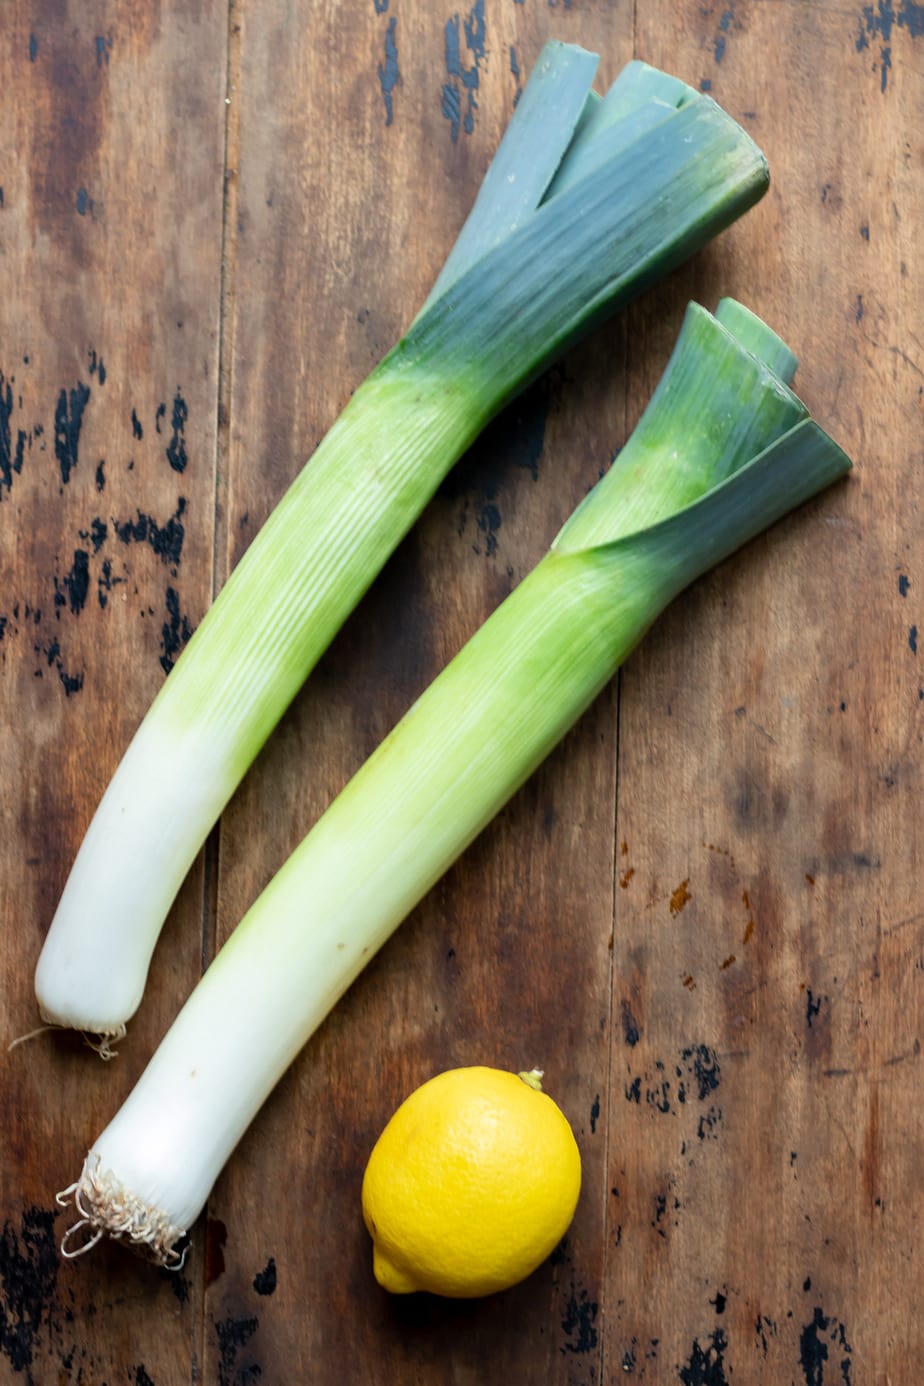 Wooden table with two leeks and a lemon.